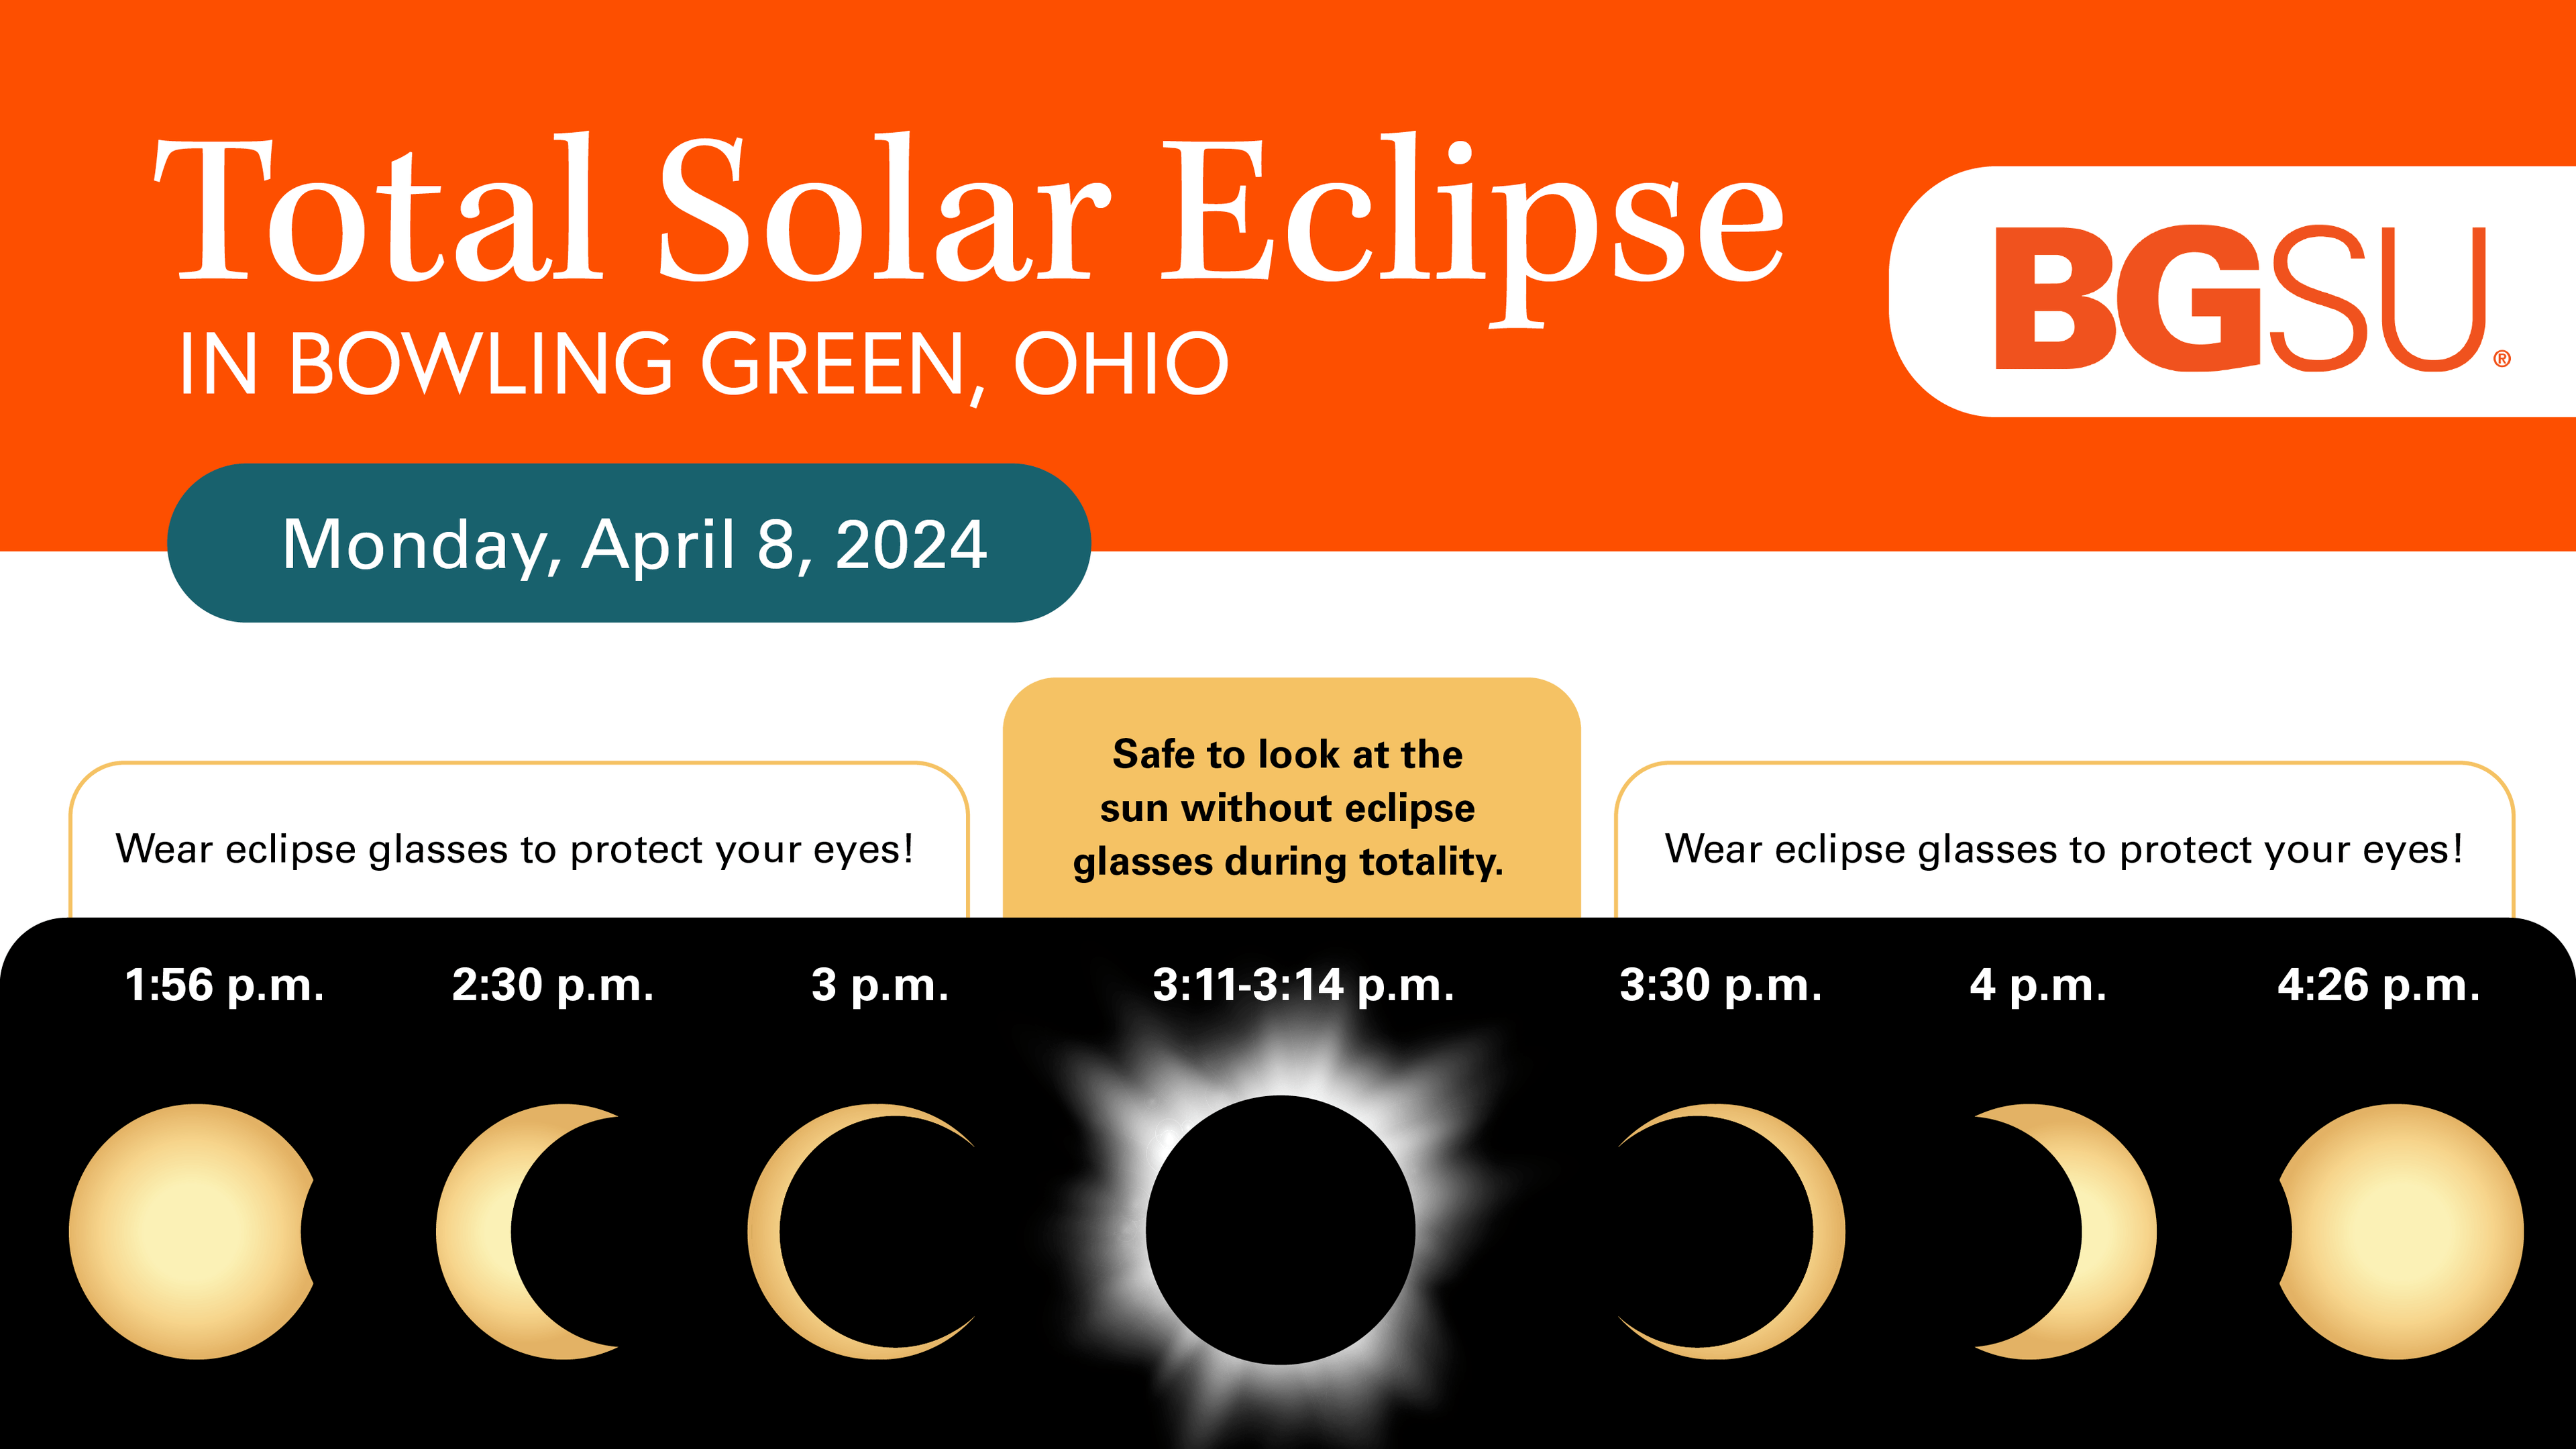 Total Solar Eclipse viewing guide